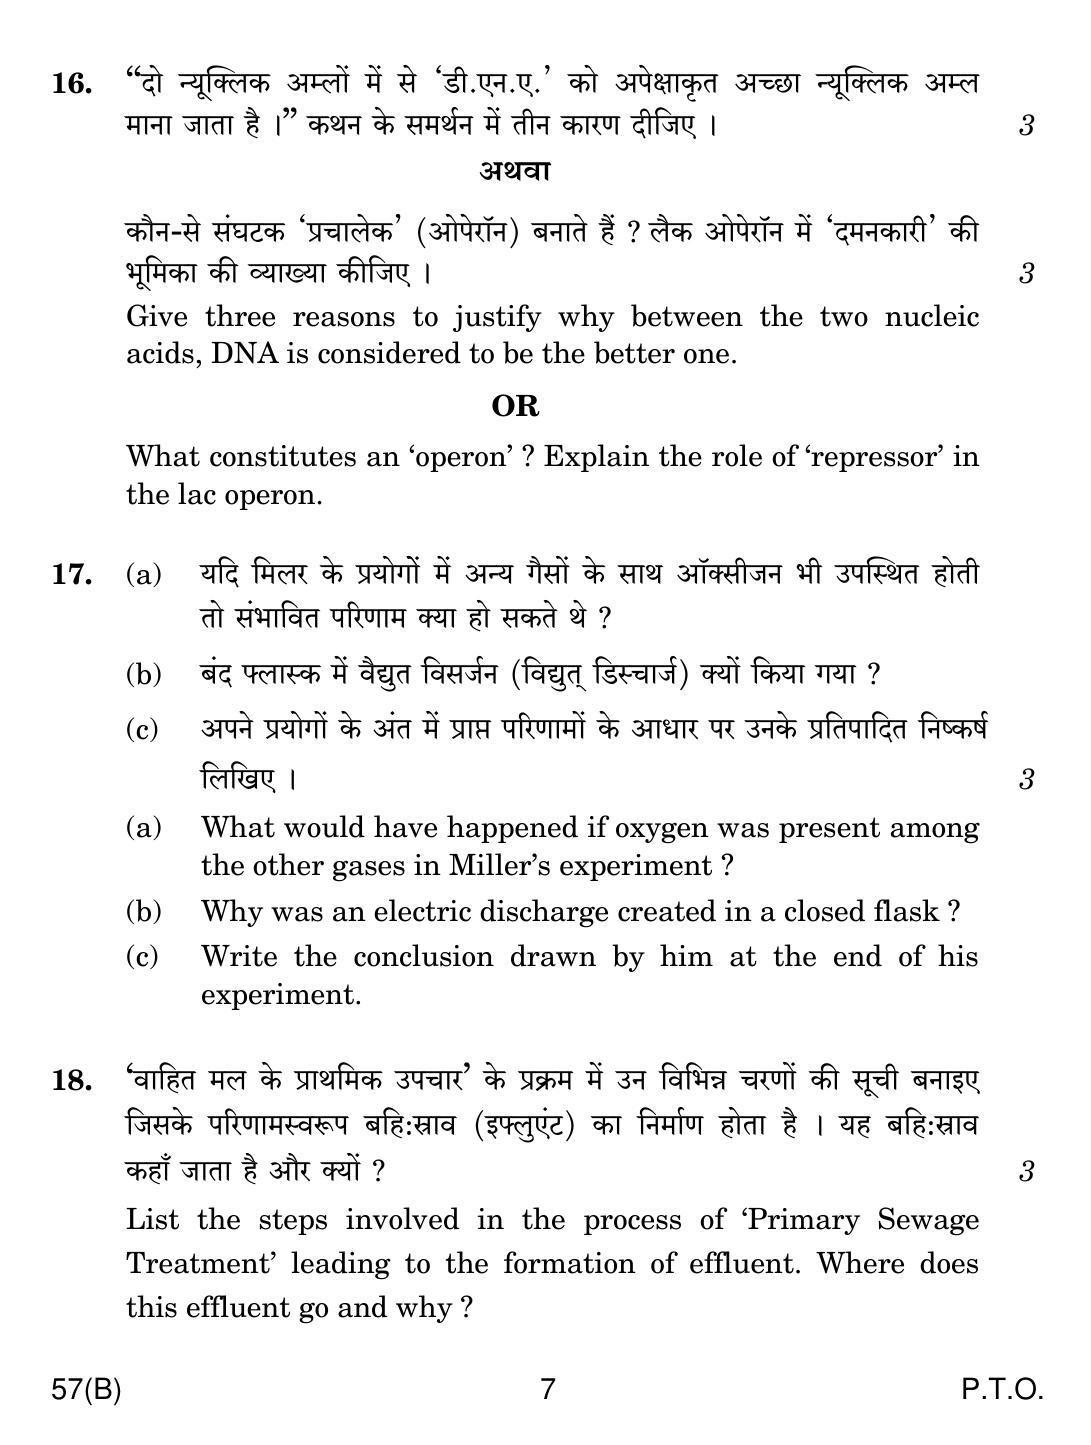 CBSE Class 12 57(B) Biology For Blind 2019 Question Paper - Page 7